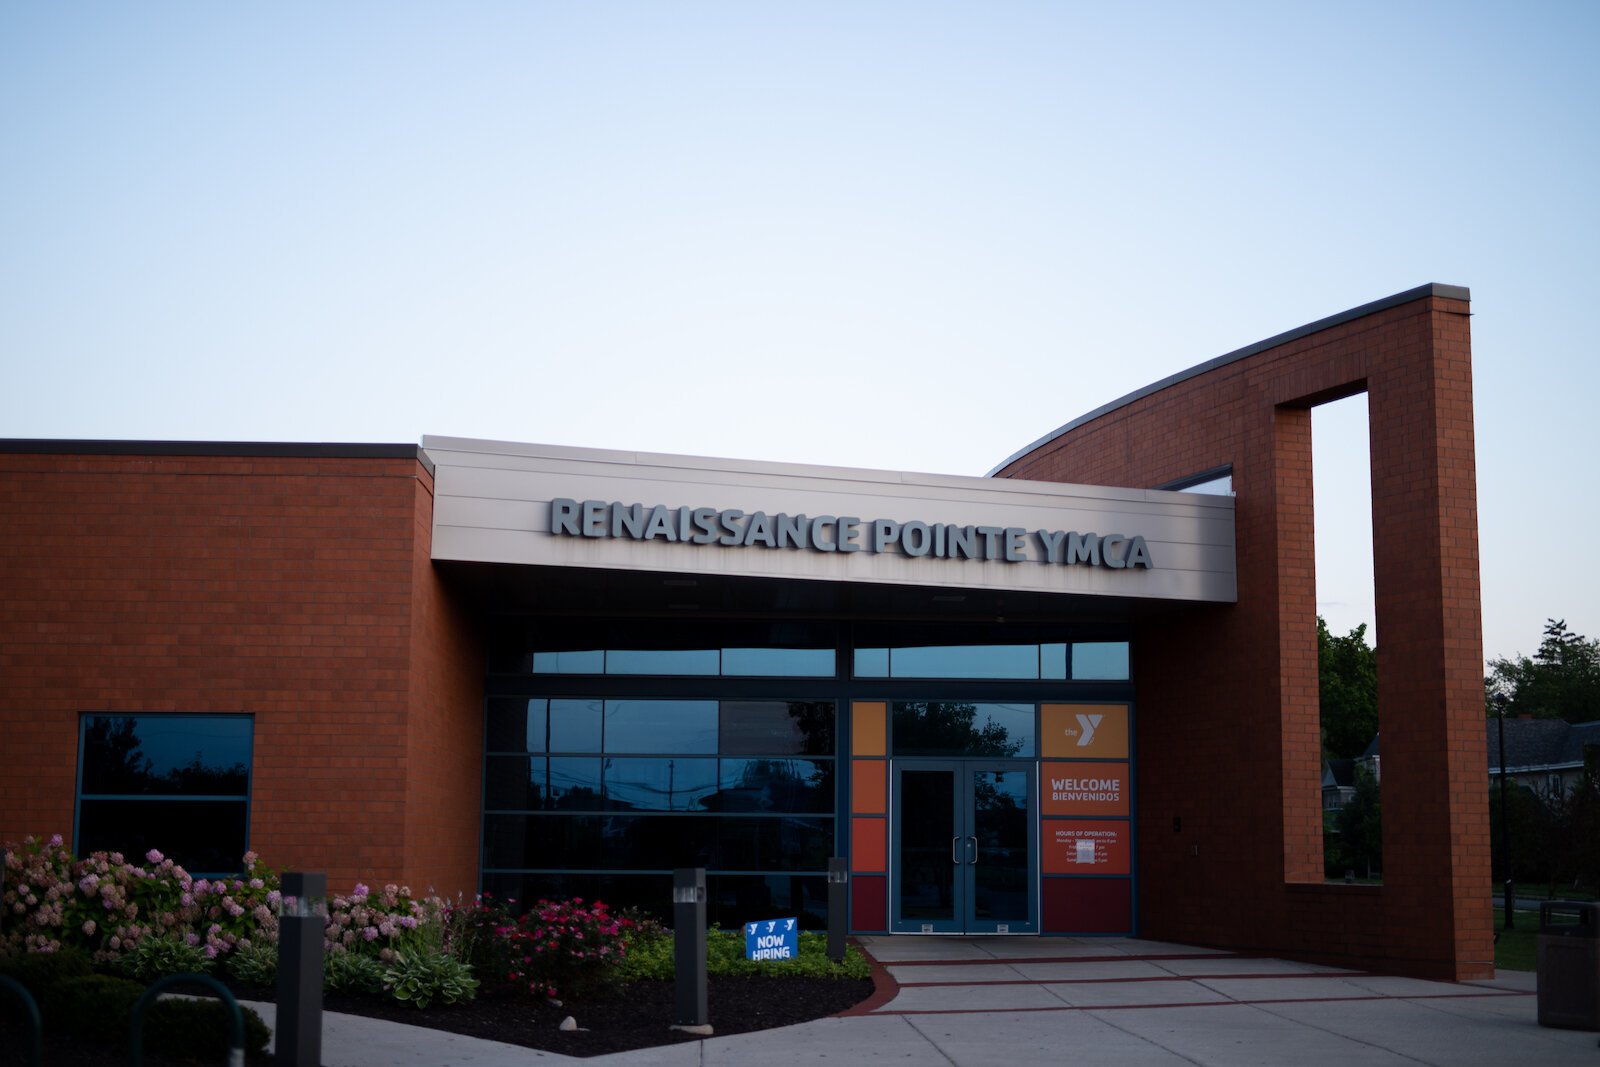 The Renaissance Pointe YMCA is a community focal point in South East.